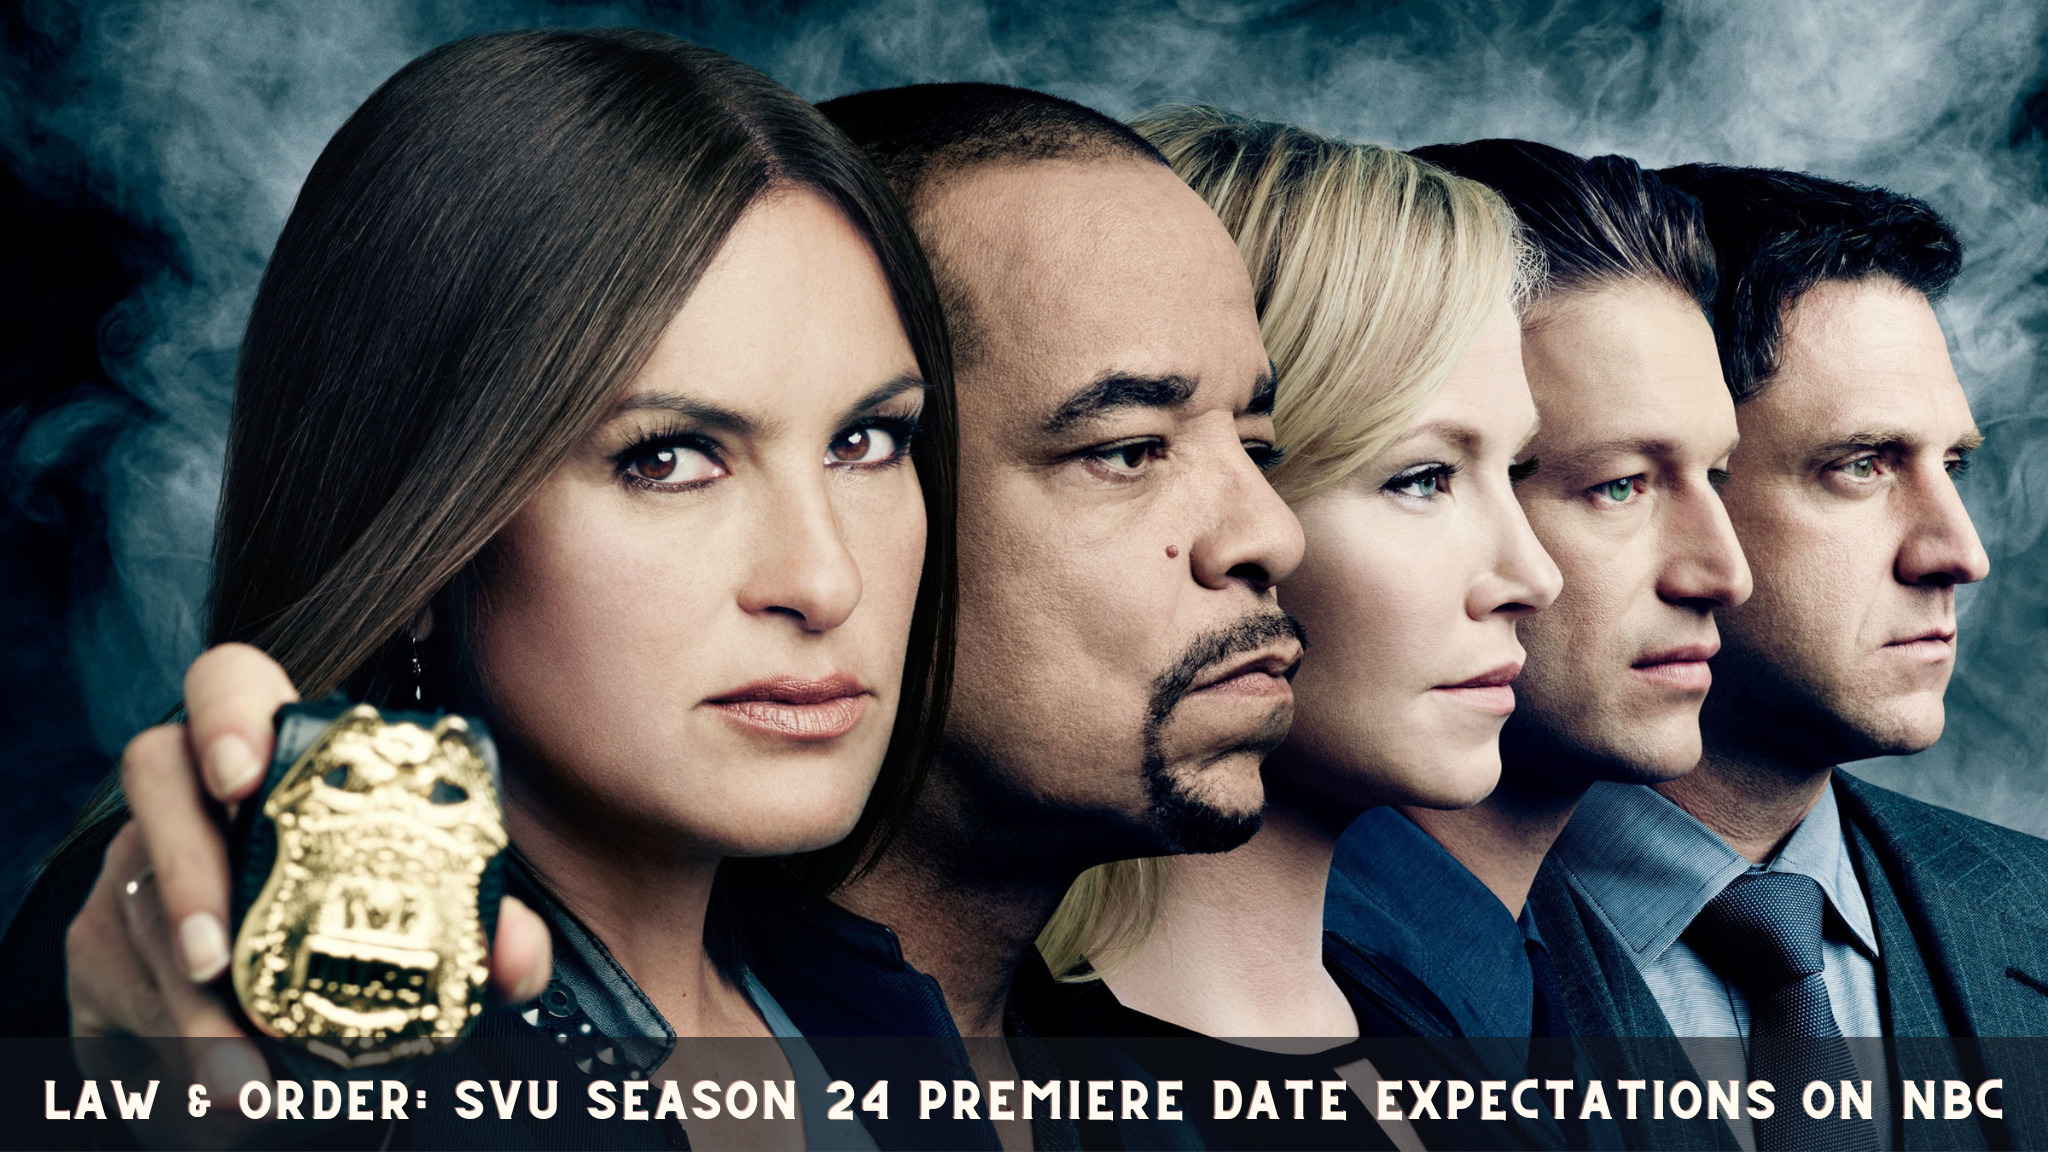 Law & Order: SVU Season 24 Premiere Date Expectations on NBC